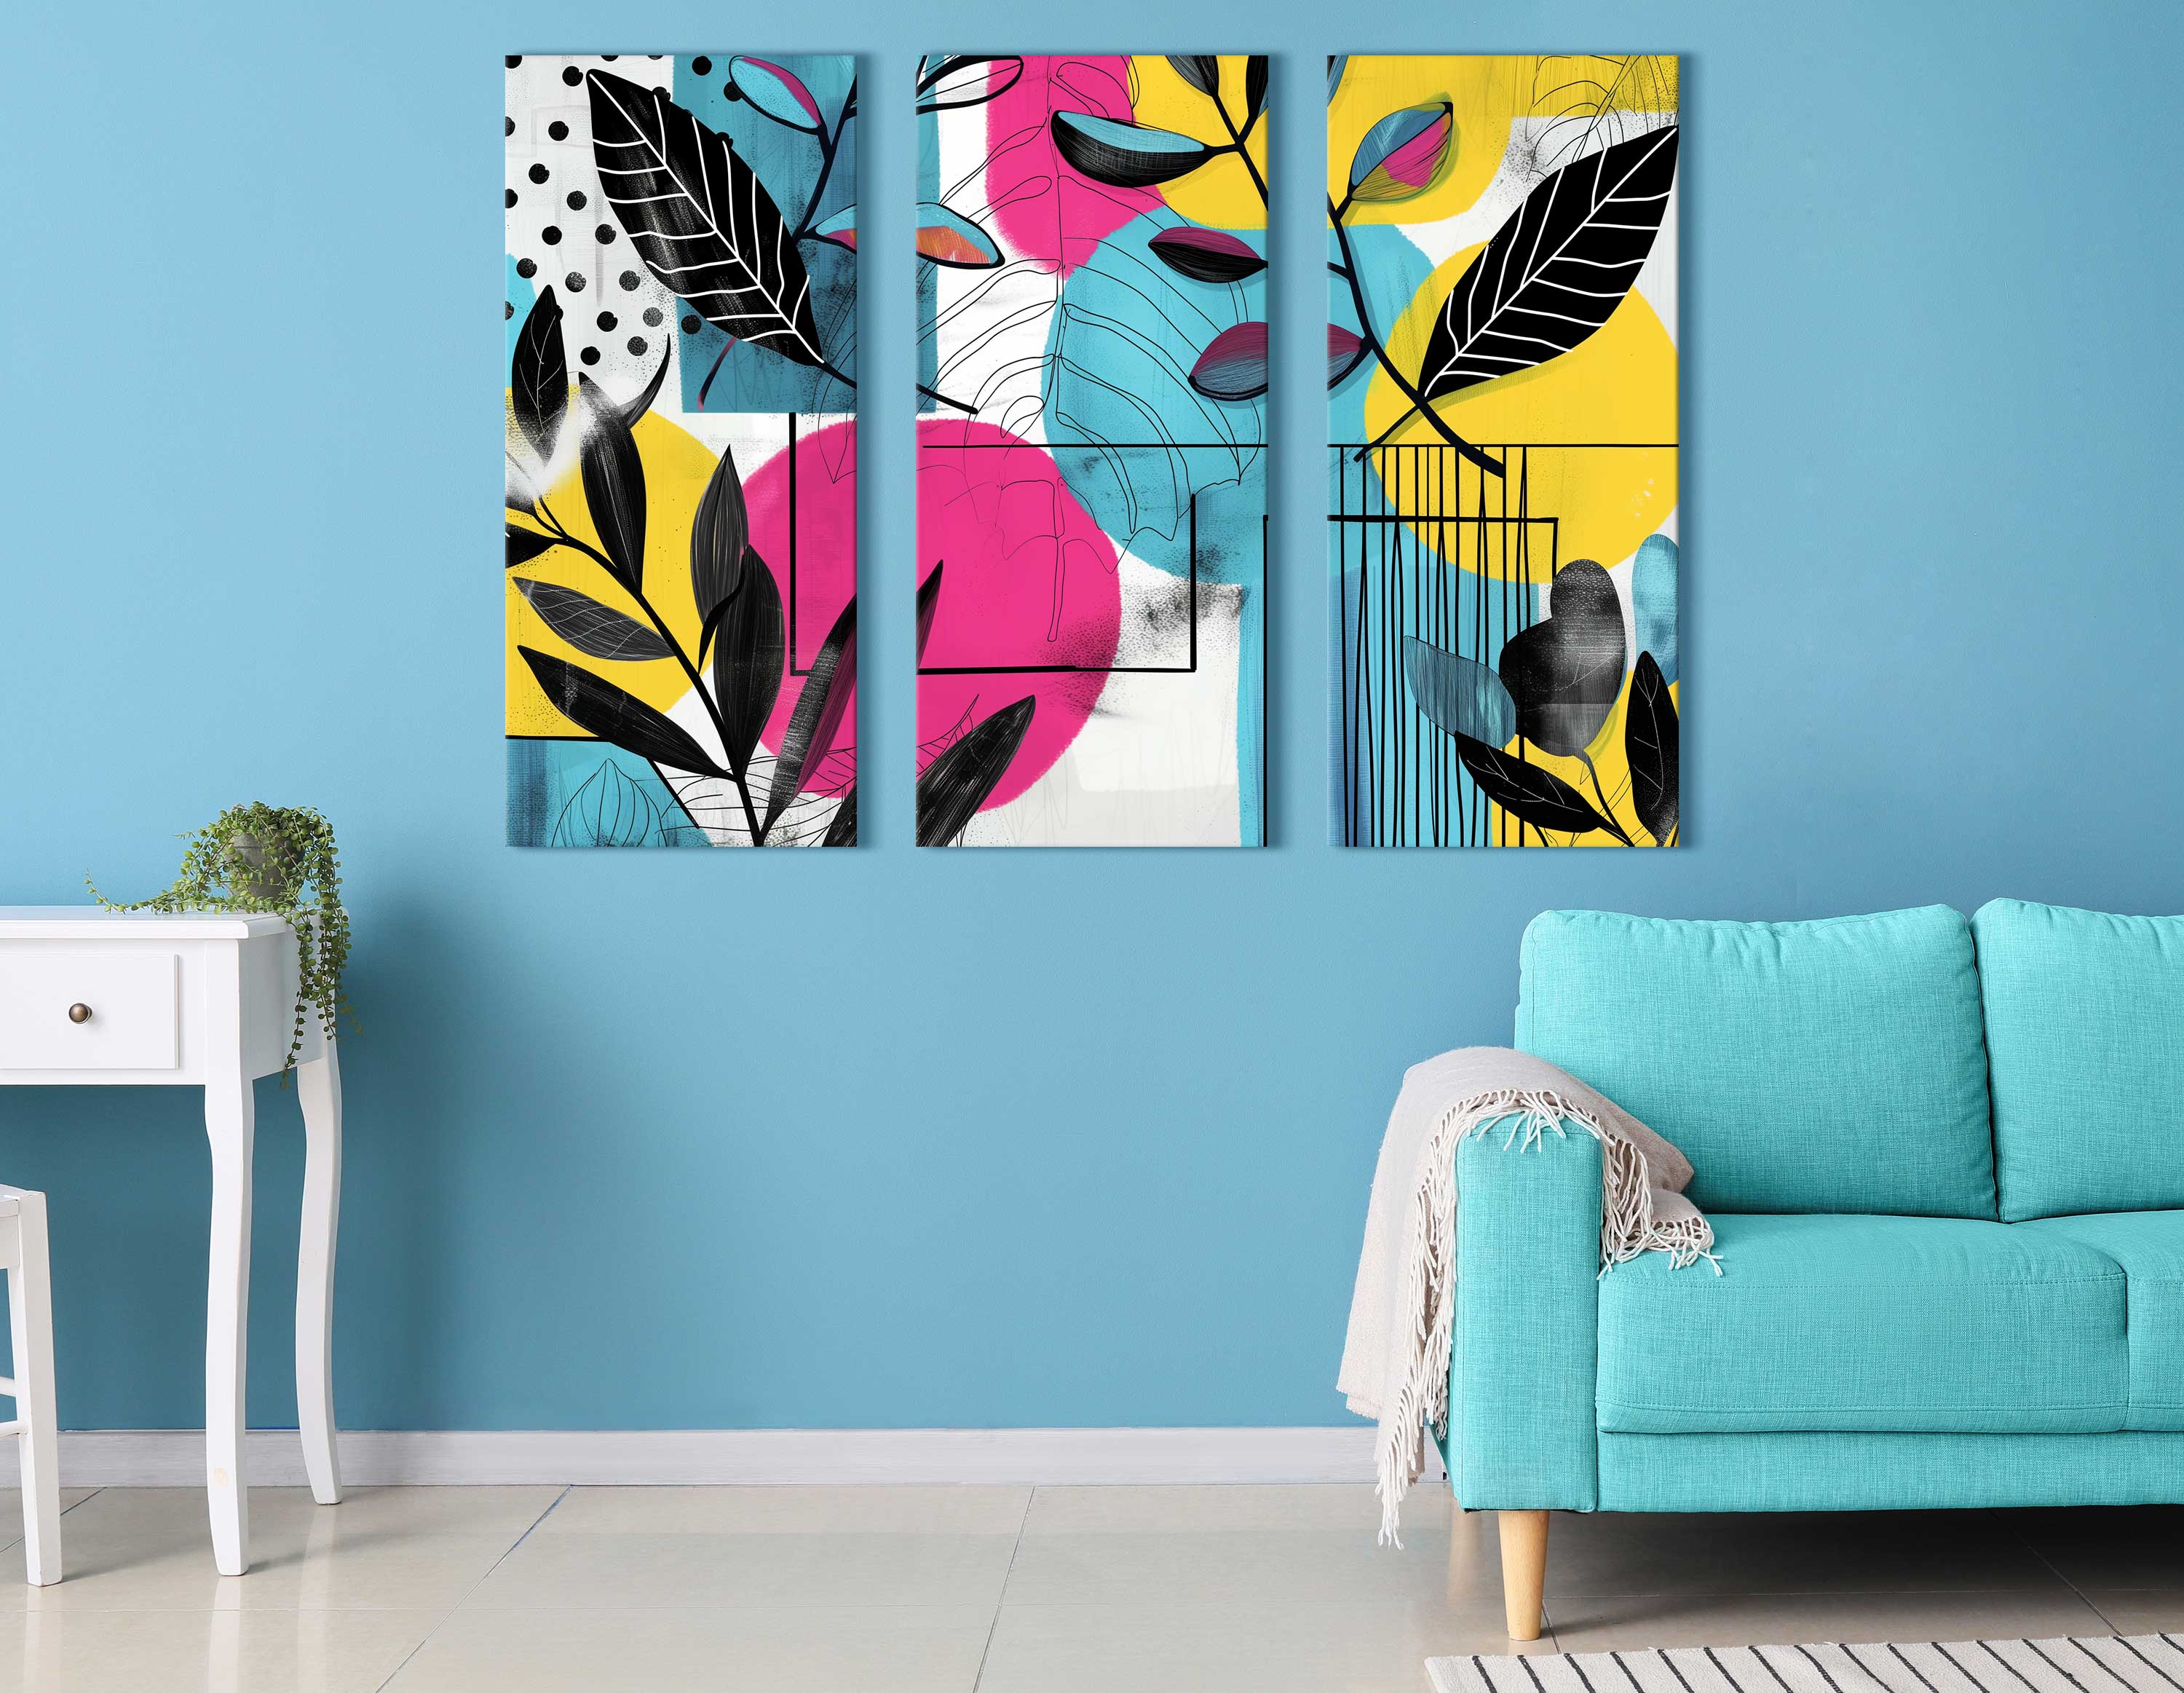 Artistic Pink, Blue, and Yellow Wall Hanging